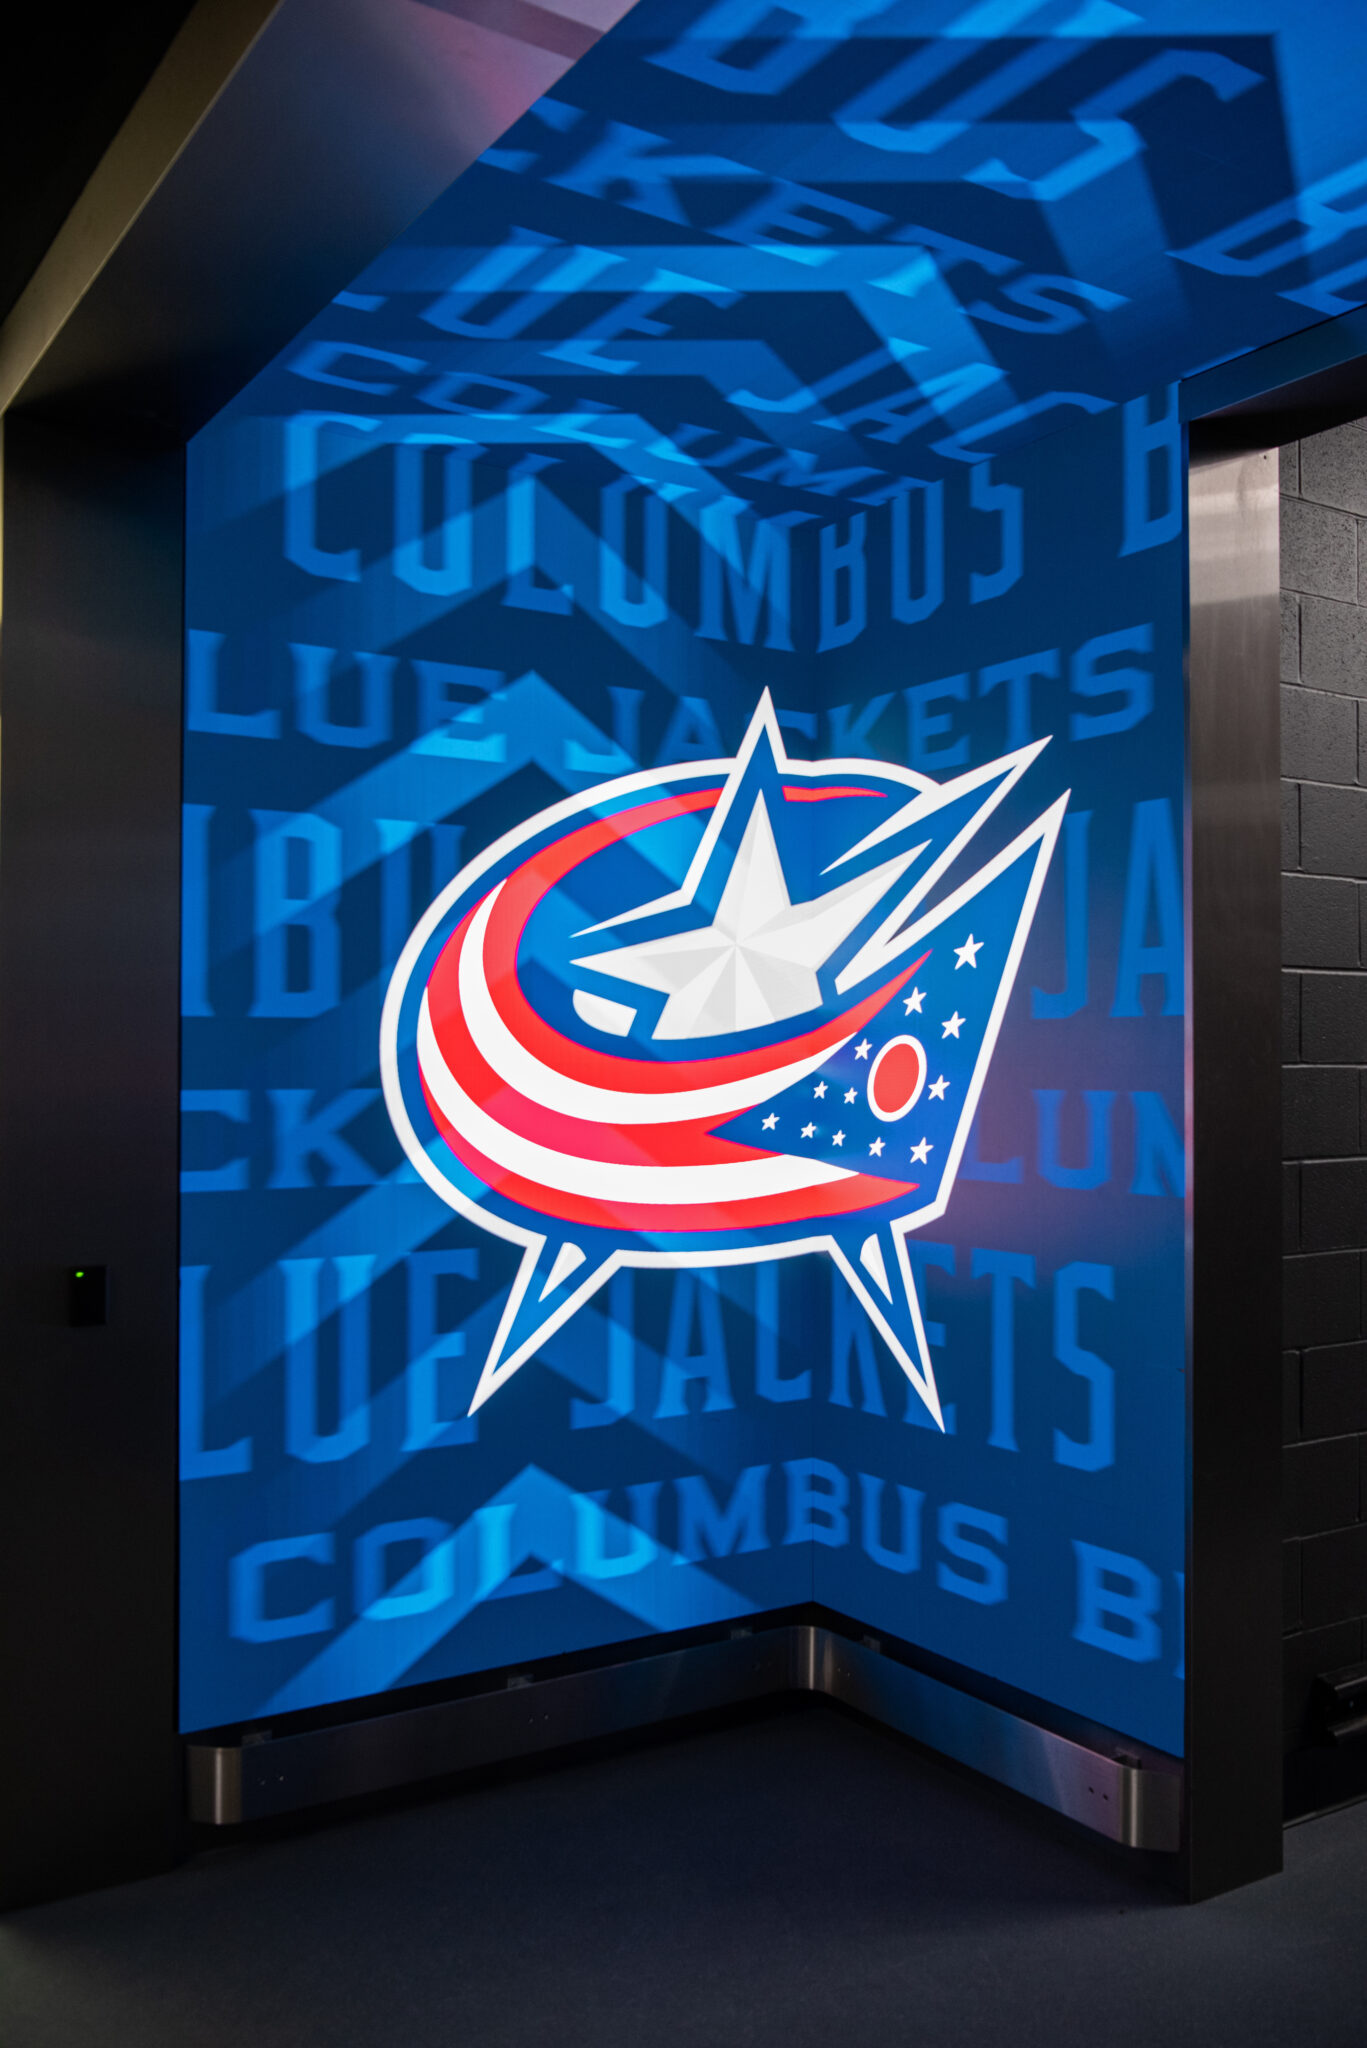 Nationwide Arena Improvements - video board showing blue jackets logo